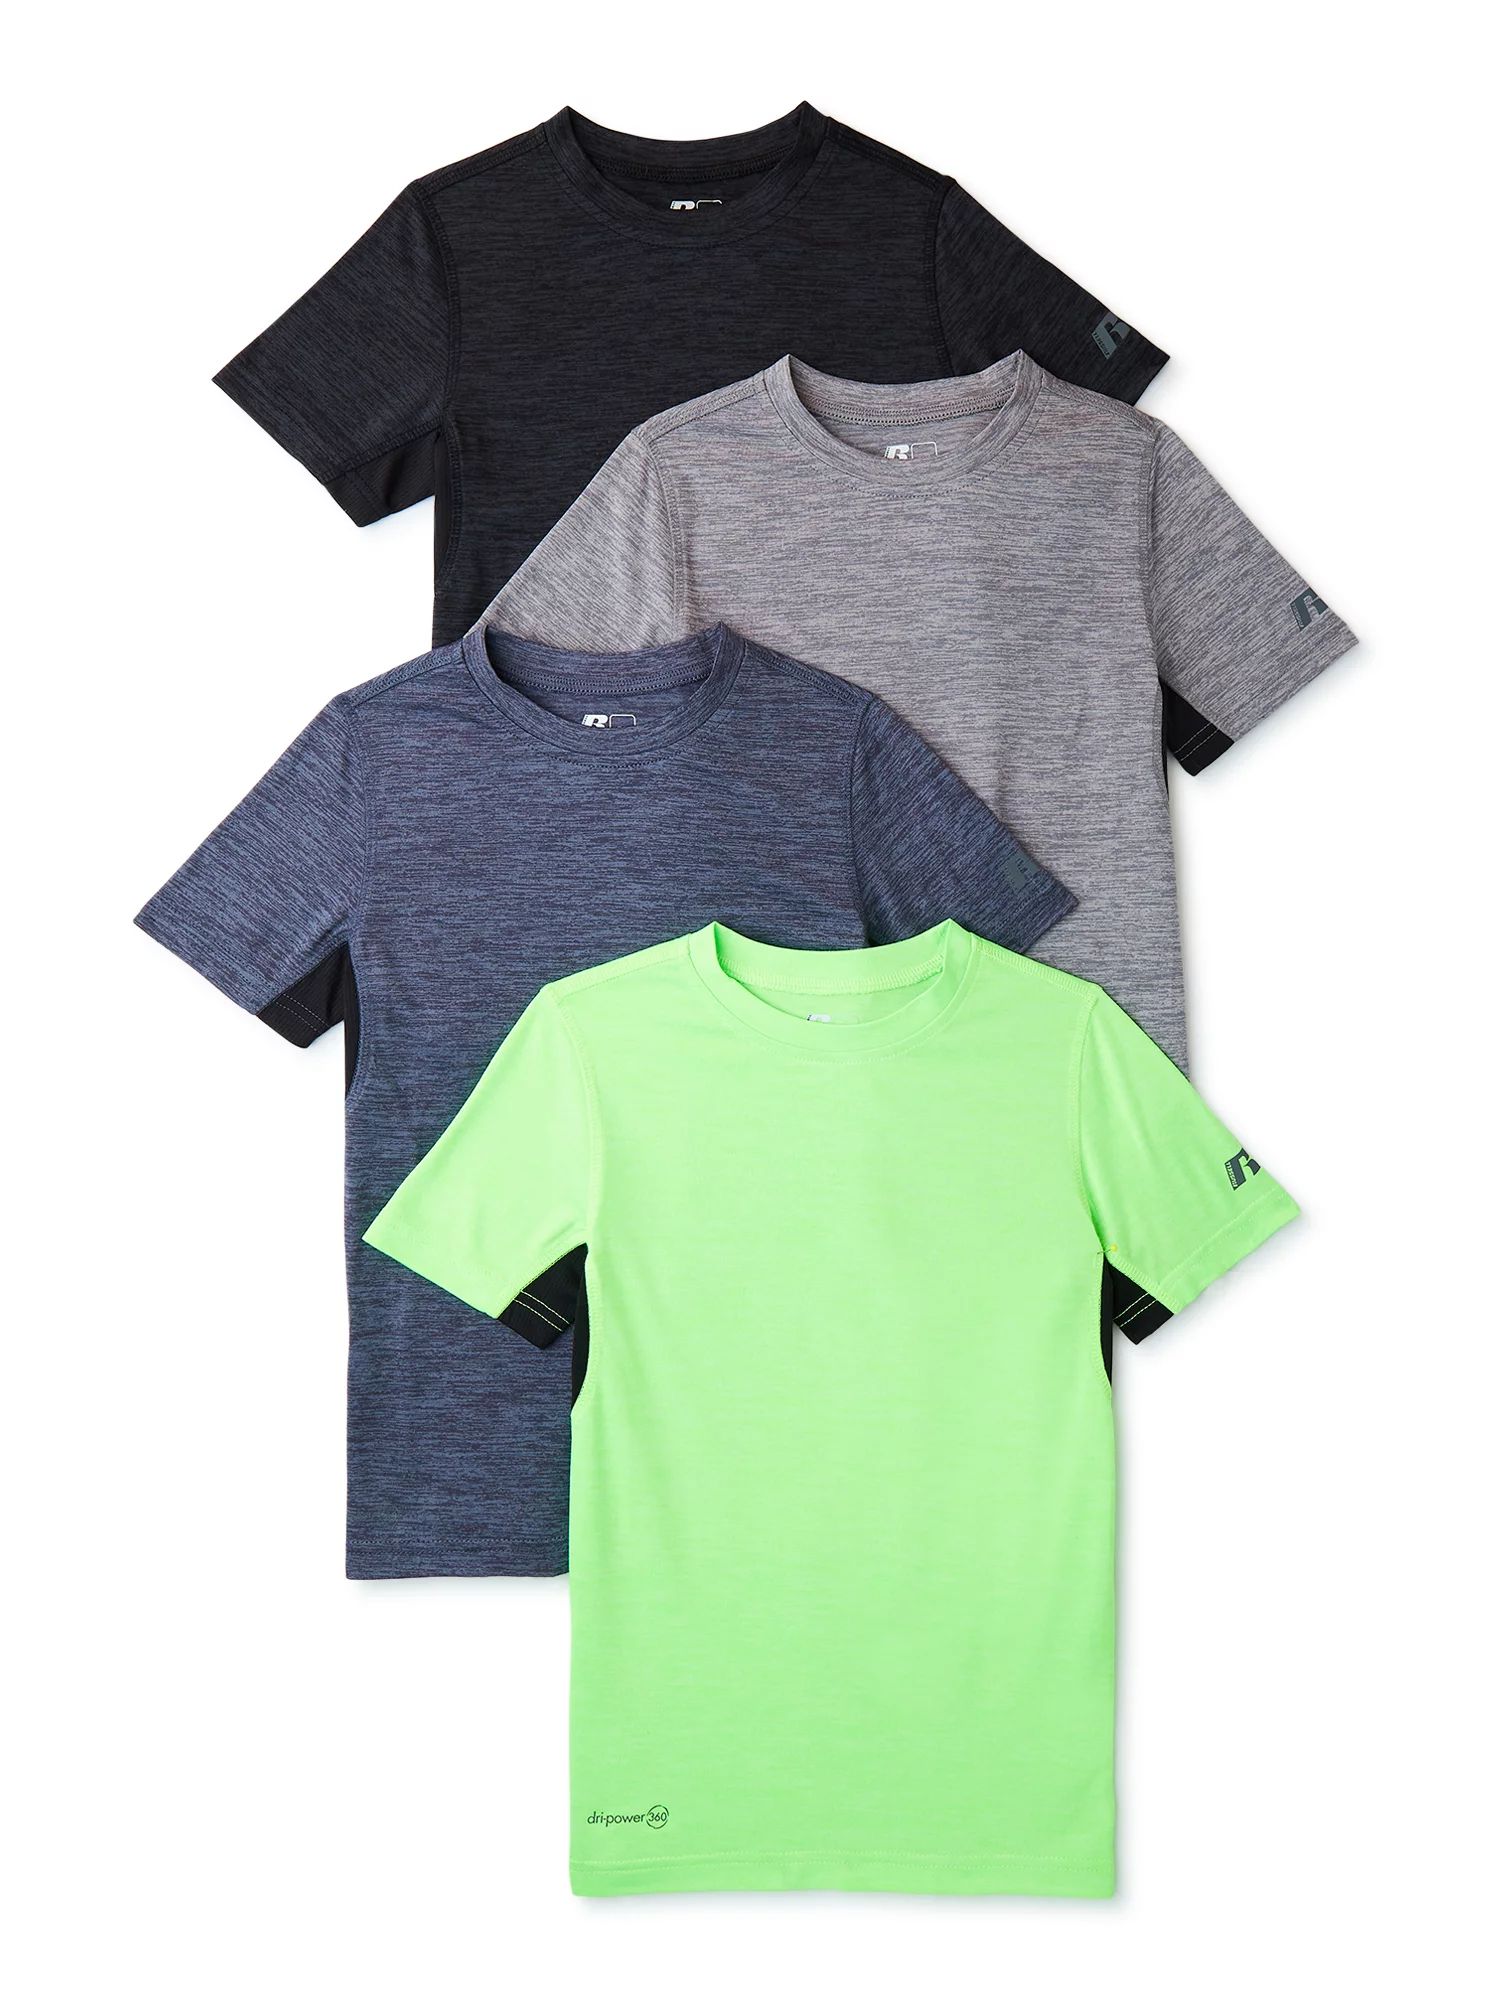 Russell Boys Year Round T-Shirts, 4-Pack, Sizes 4-18 | Walmart (US)